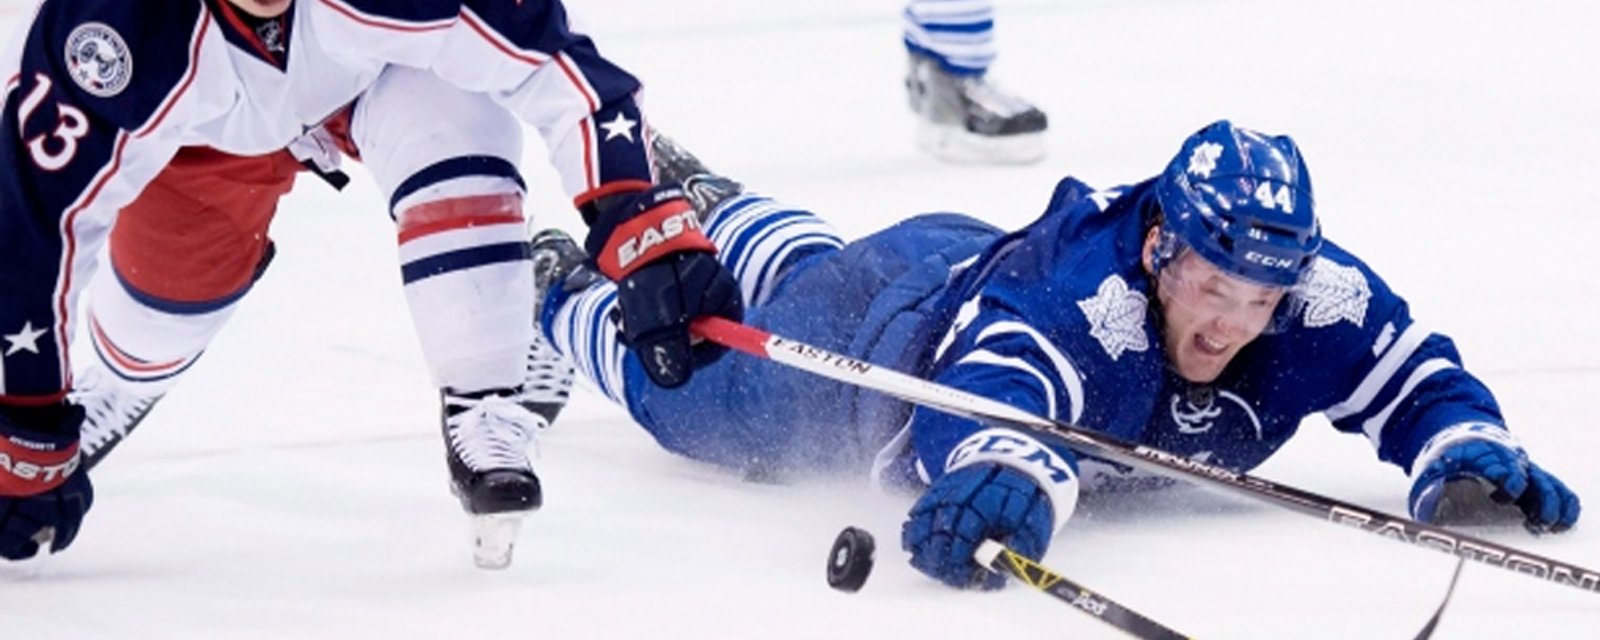 Rielly concerned about how Leafs match up against Blue Jackets